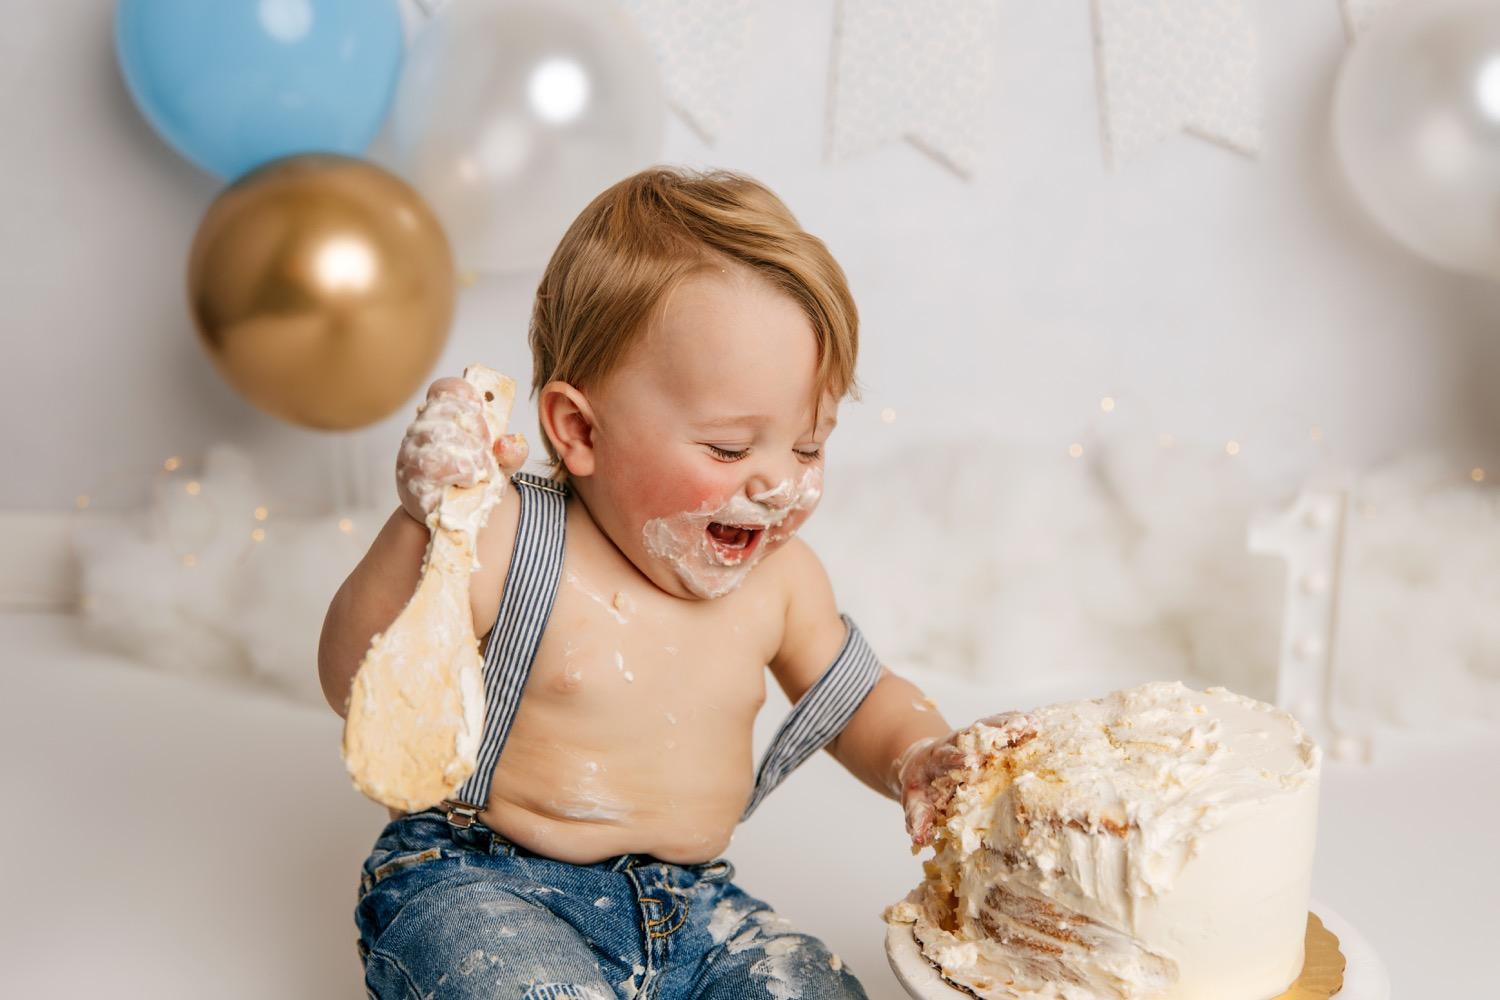 This Birthday Cake for a Photographer is Soft and Creamy at f/1.4 |  PetaPixel